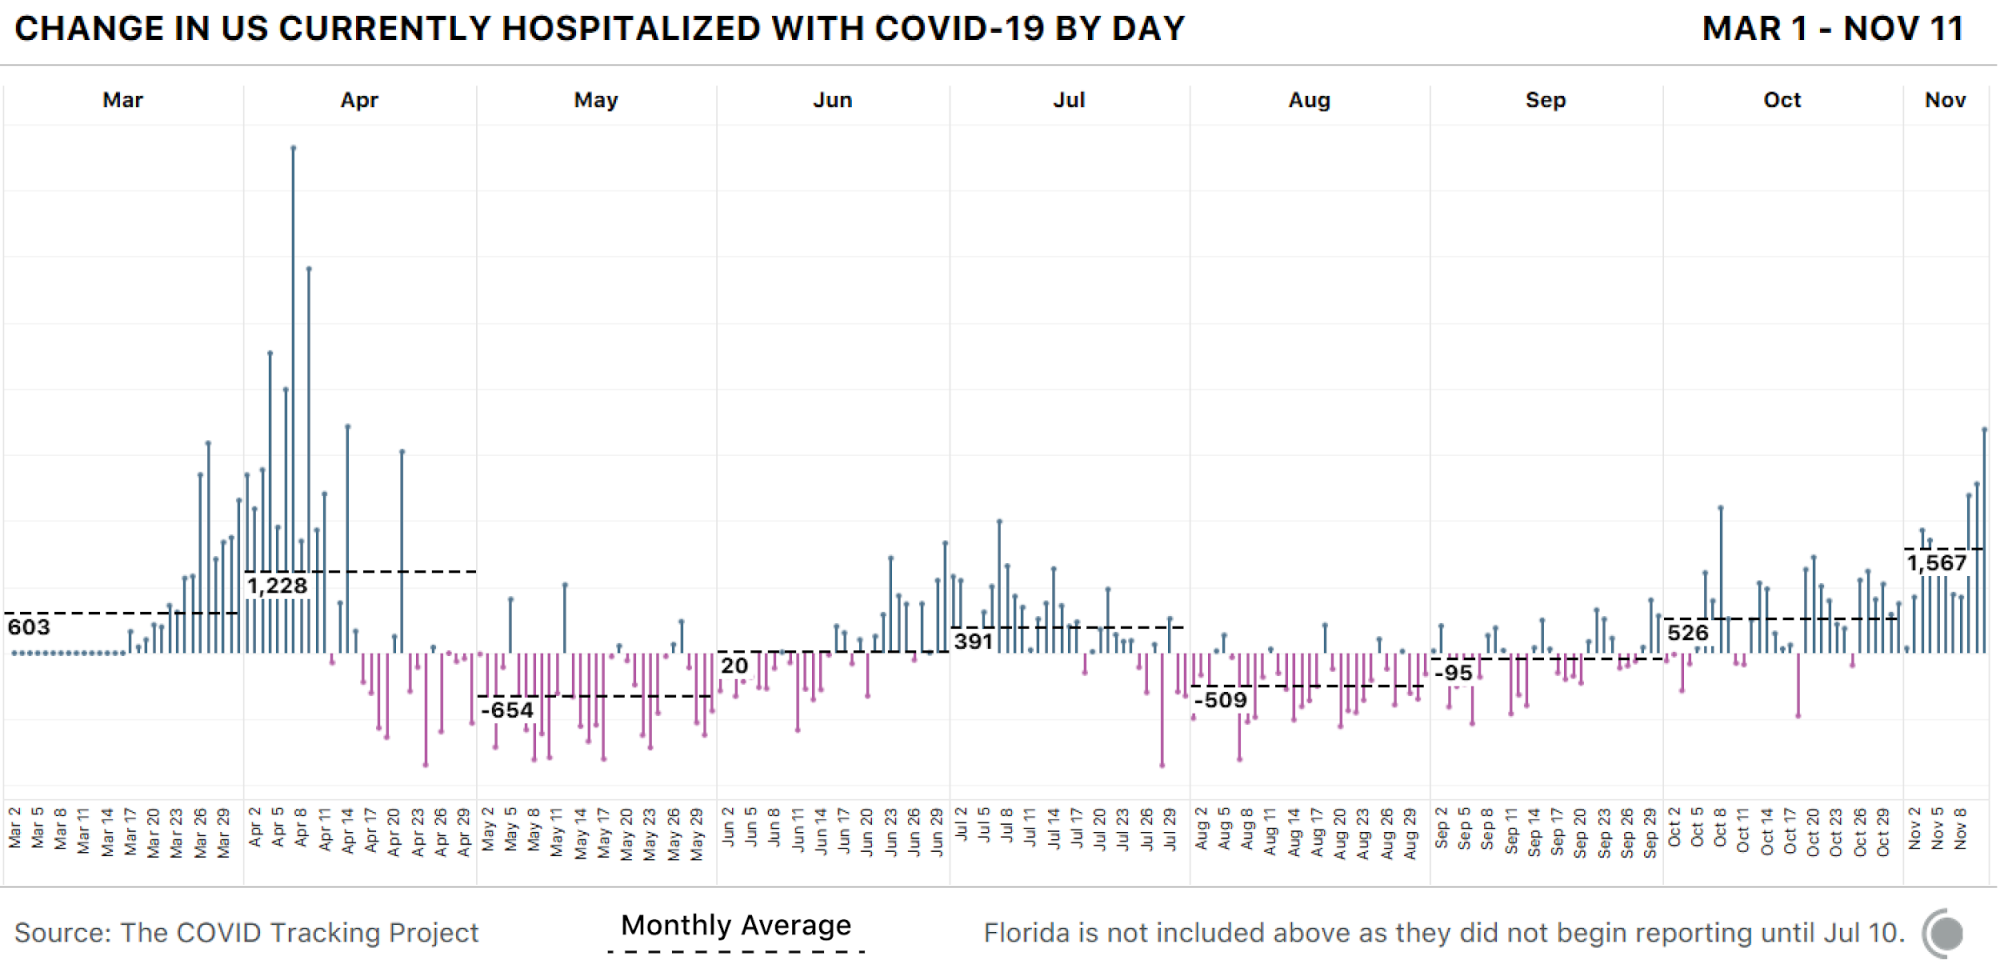 Bar chart showing the daily change in the number of currently hospitalized people in US with COVID-19. The figure is increasing more quickly in recent months. The daily figure rose by over 1,500 people on average in November so far.